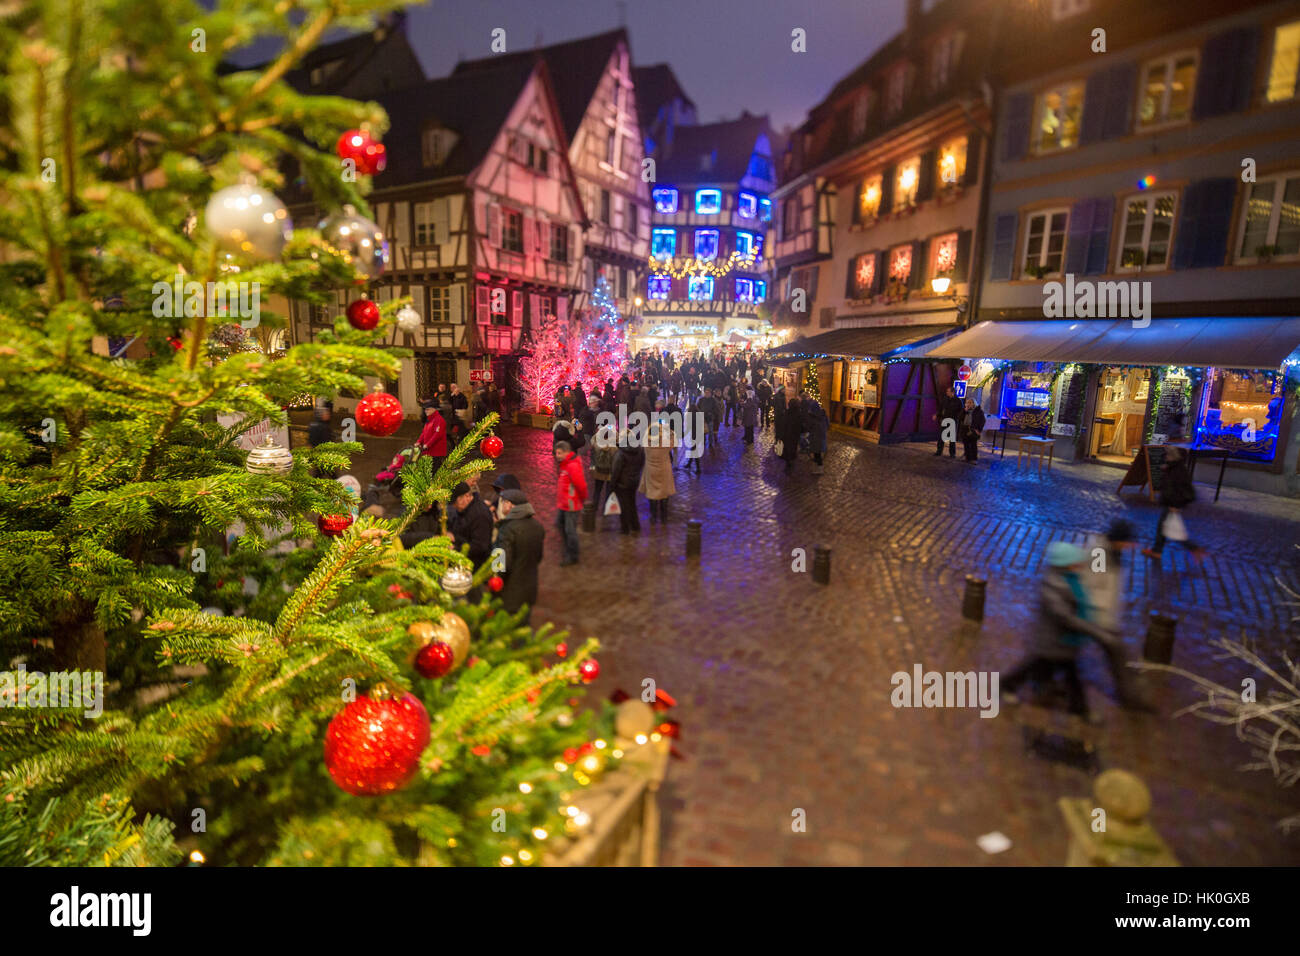 Colourful lights on Christmas trees and ornaments at dusk, Colmar, Haut-Rhin department, Alsace, France Stock Photo